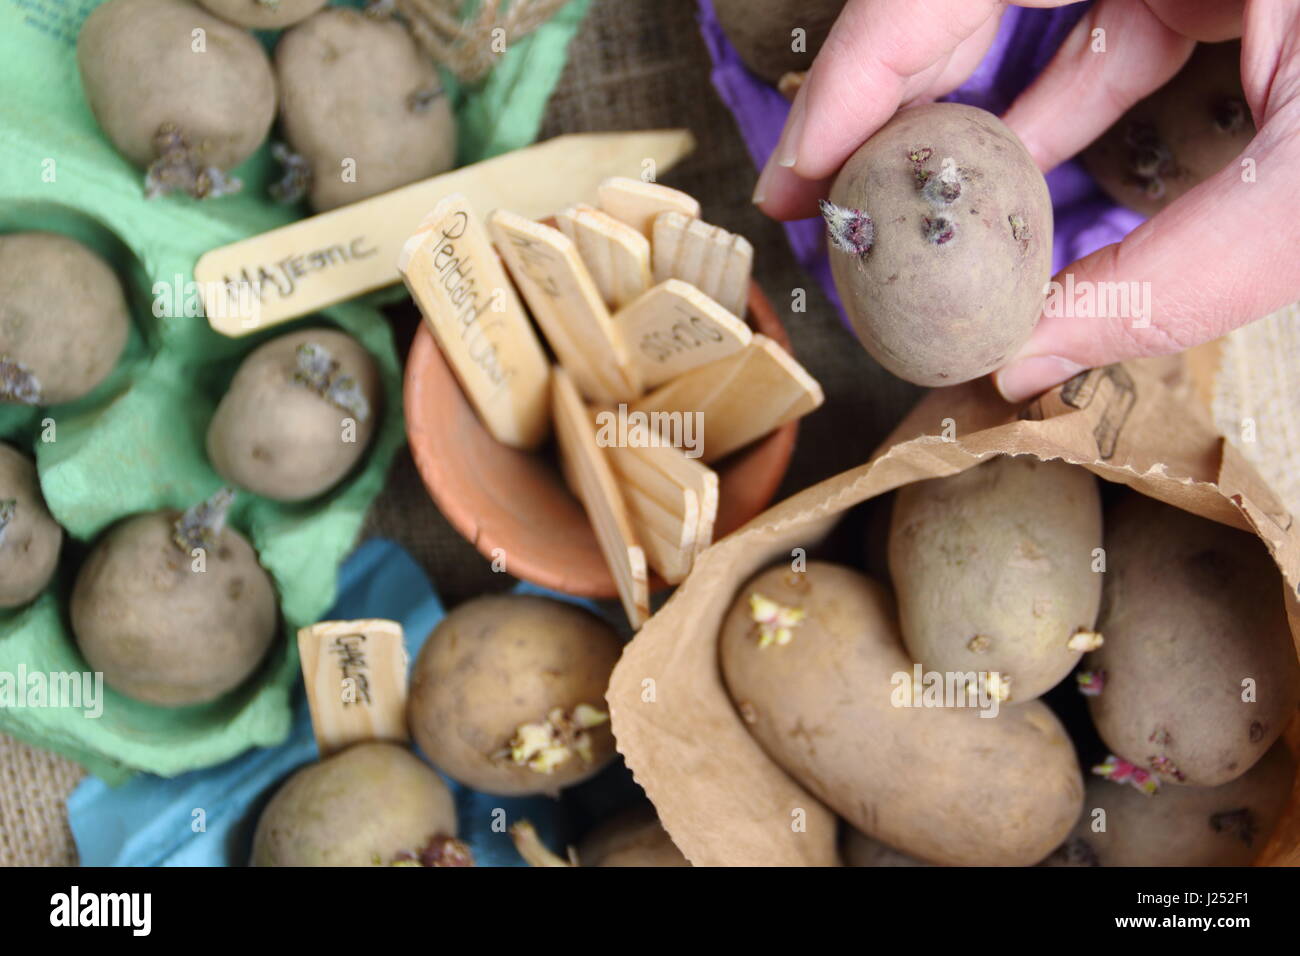 Male gardener labels chitting seed potato varieties  in egg box containers to encourage strong sprouting before planting out in garden vegetable patch Stock Photo